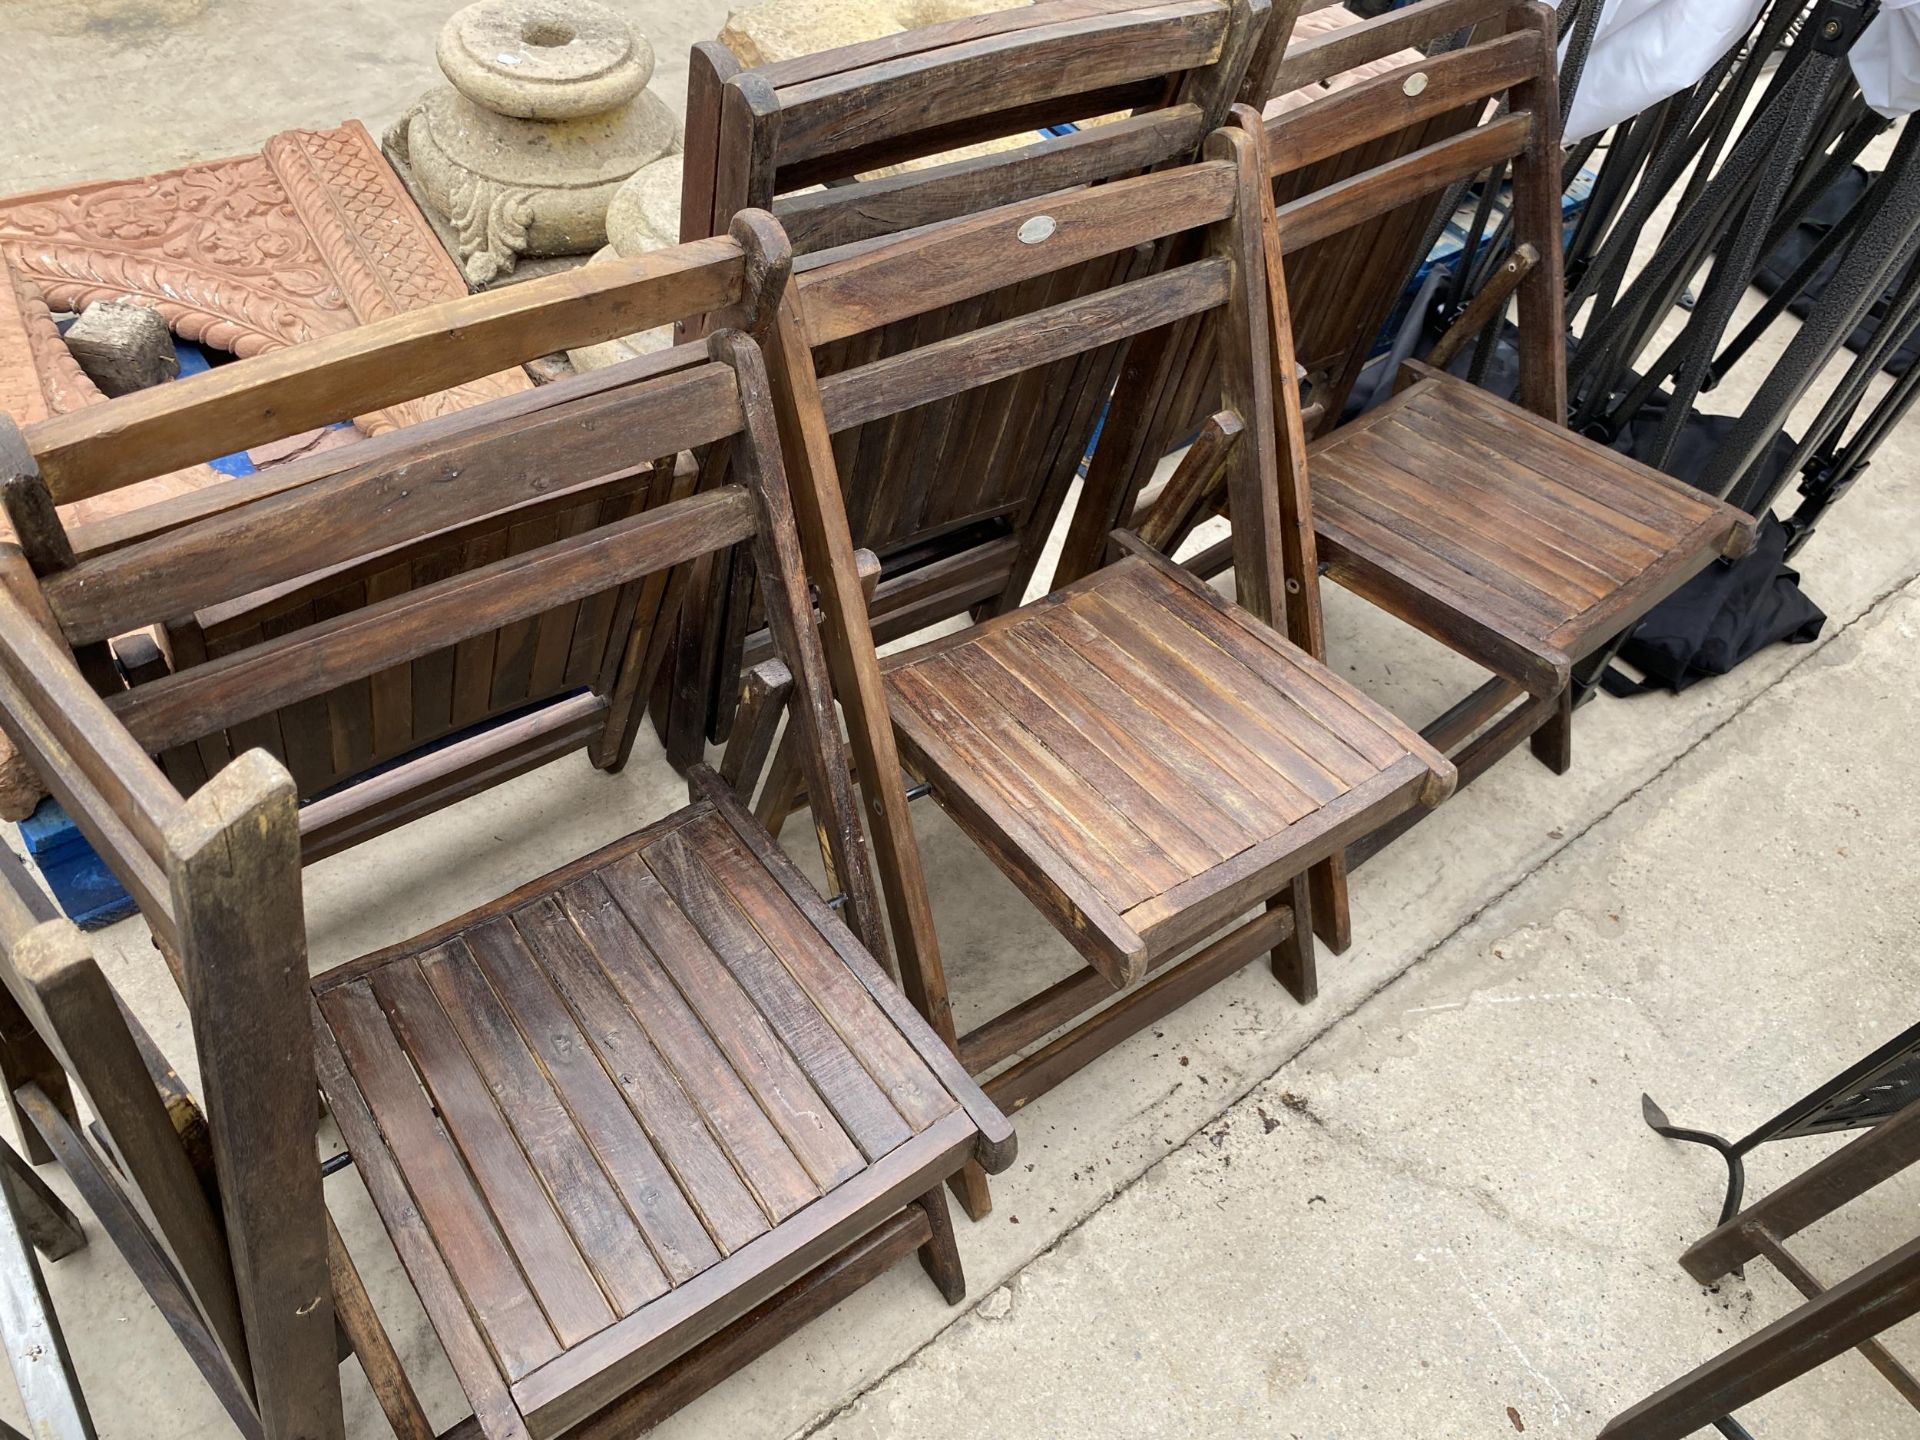 A BOXED AS NEW SET OF FIVE VINTAGE WOODEN FOLDING GARDEN CHAIRS (IMAGE SHOWS UNBOXED EXAMPLES)